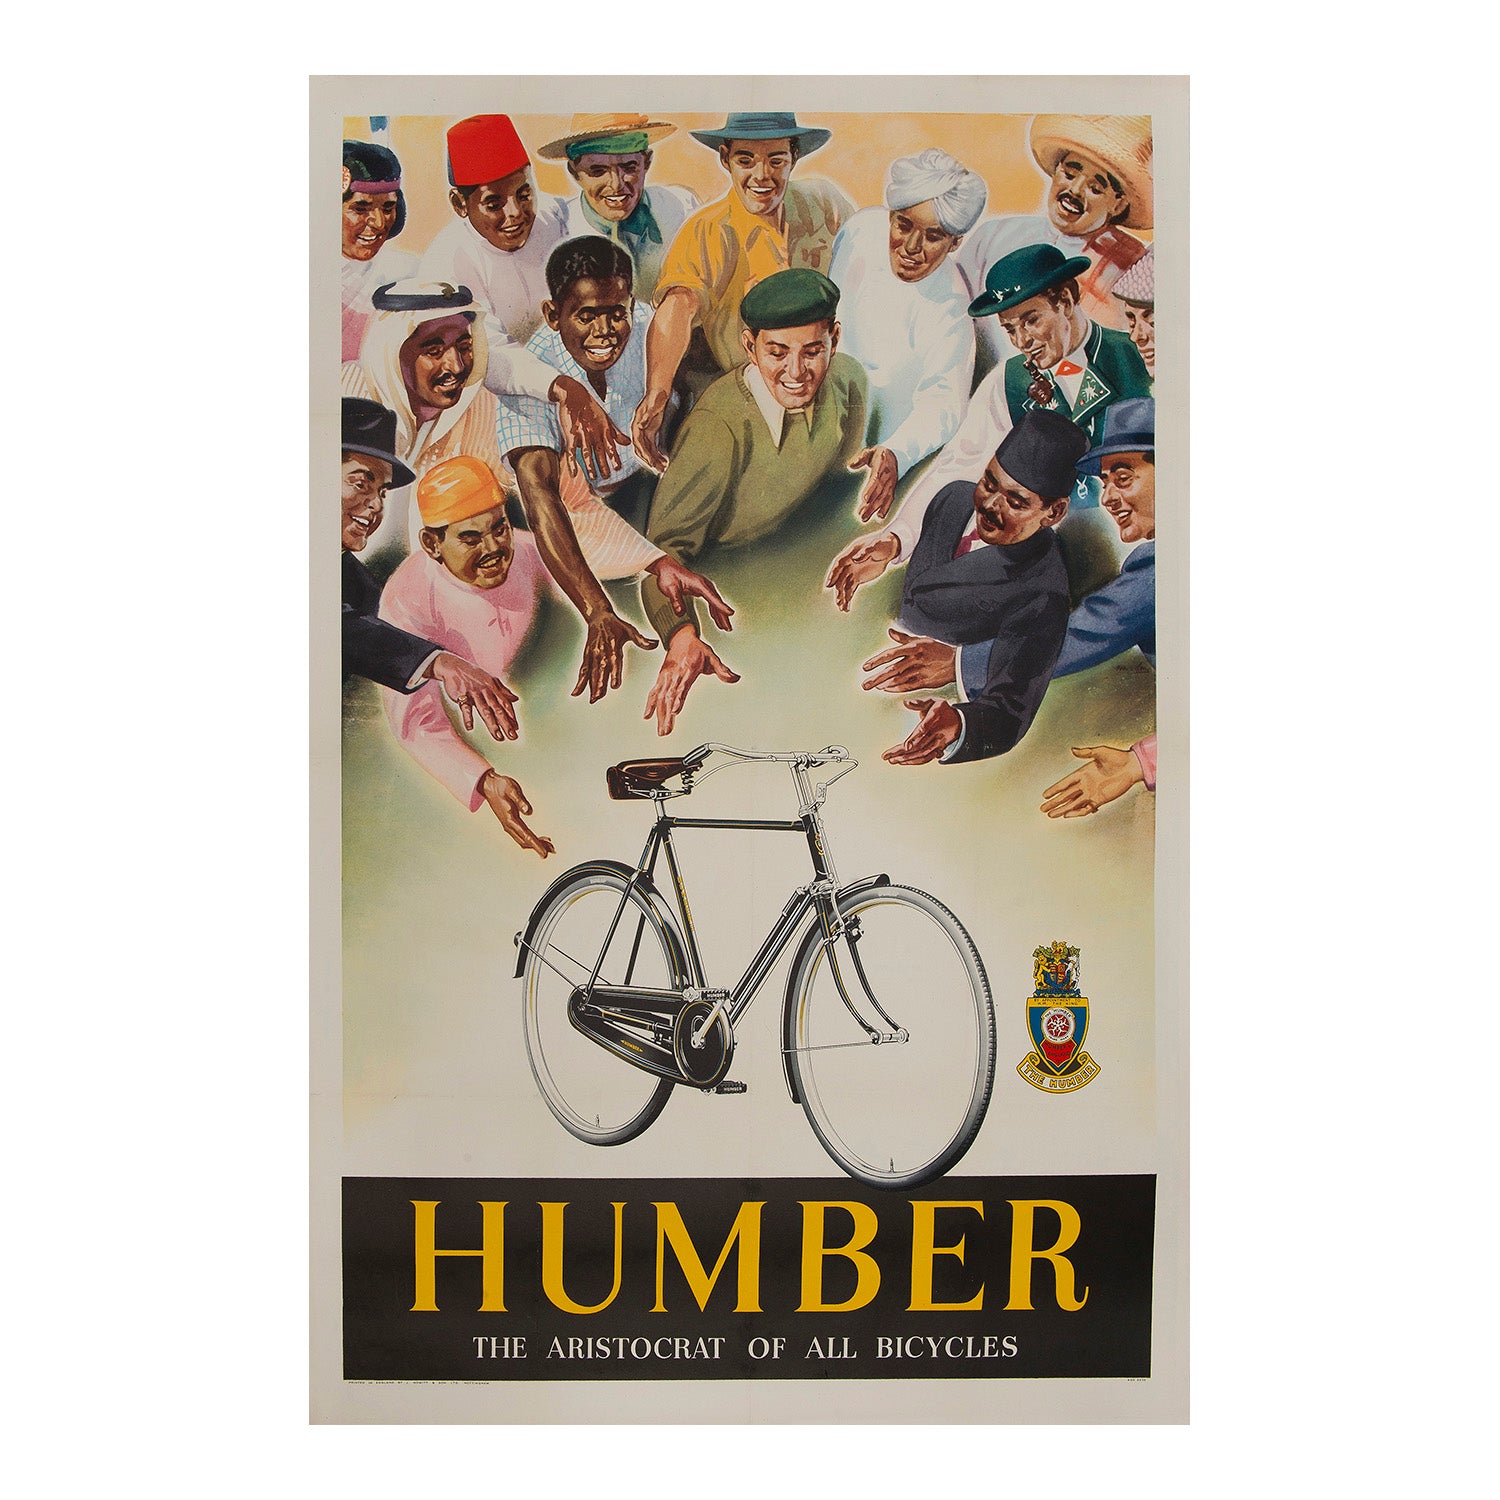 Original poster for Humber bikes from c.1935-50. The image depicts a group of young men of different ethnicities, all reaching for the Humber bike, with the slogan 'The aristocrat of all bicycles'. 